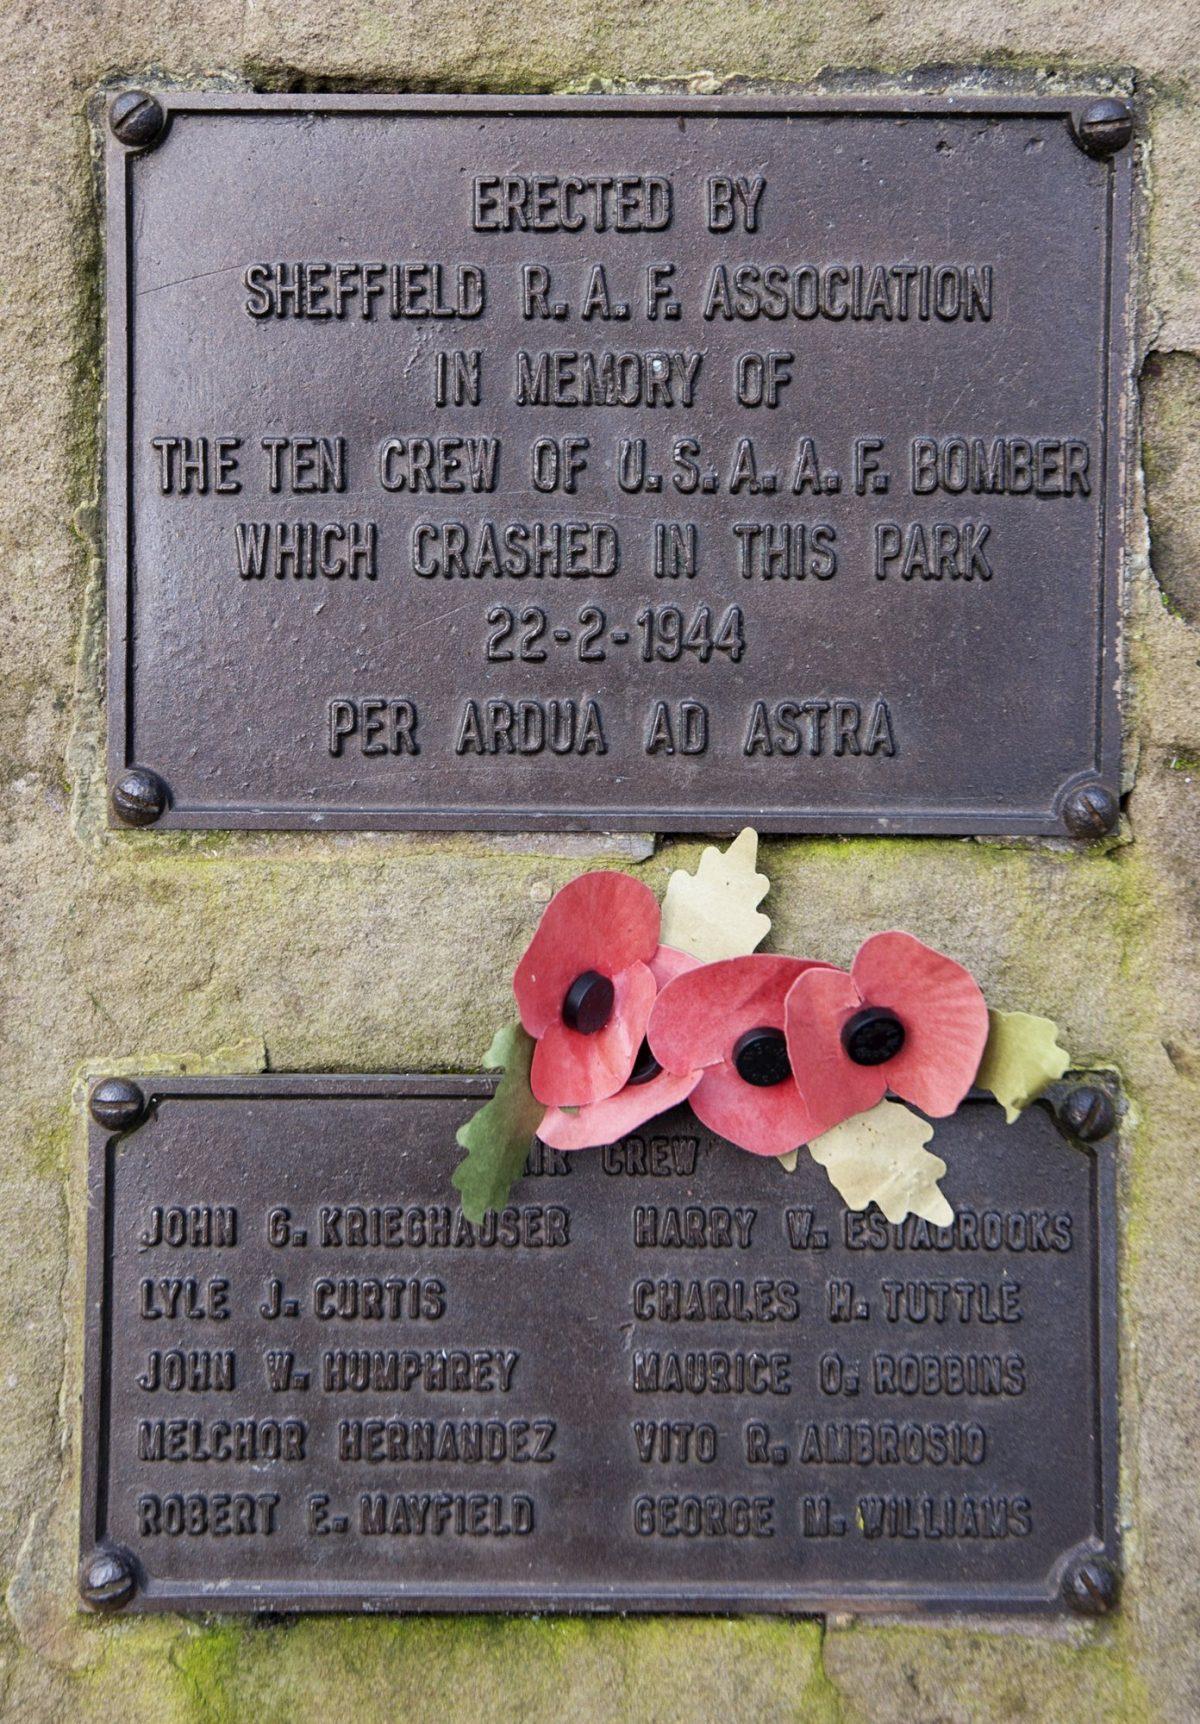 A close-up taken of the memorial honoring 10 U.S. airmen who died in a plane crash on Feb. 22, 1944, in Endcliffe Park, Sheffield, England on Feb. 13, 2019. (Rui Vieira/AP Photo)